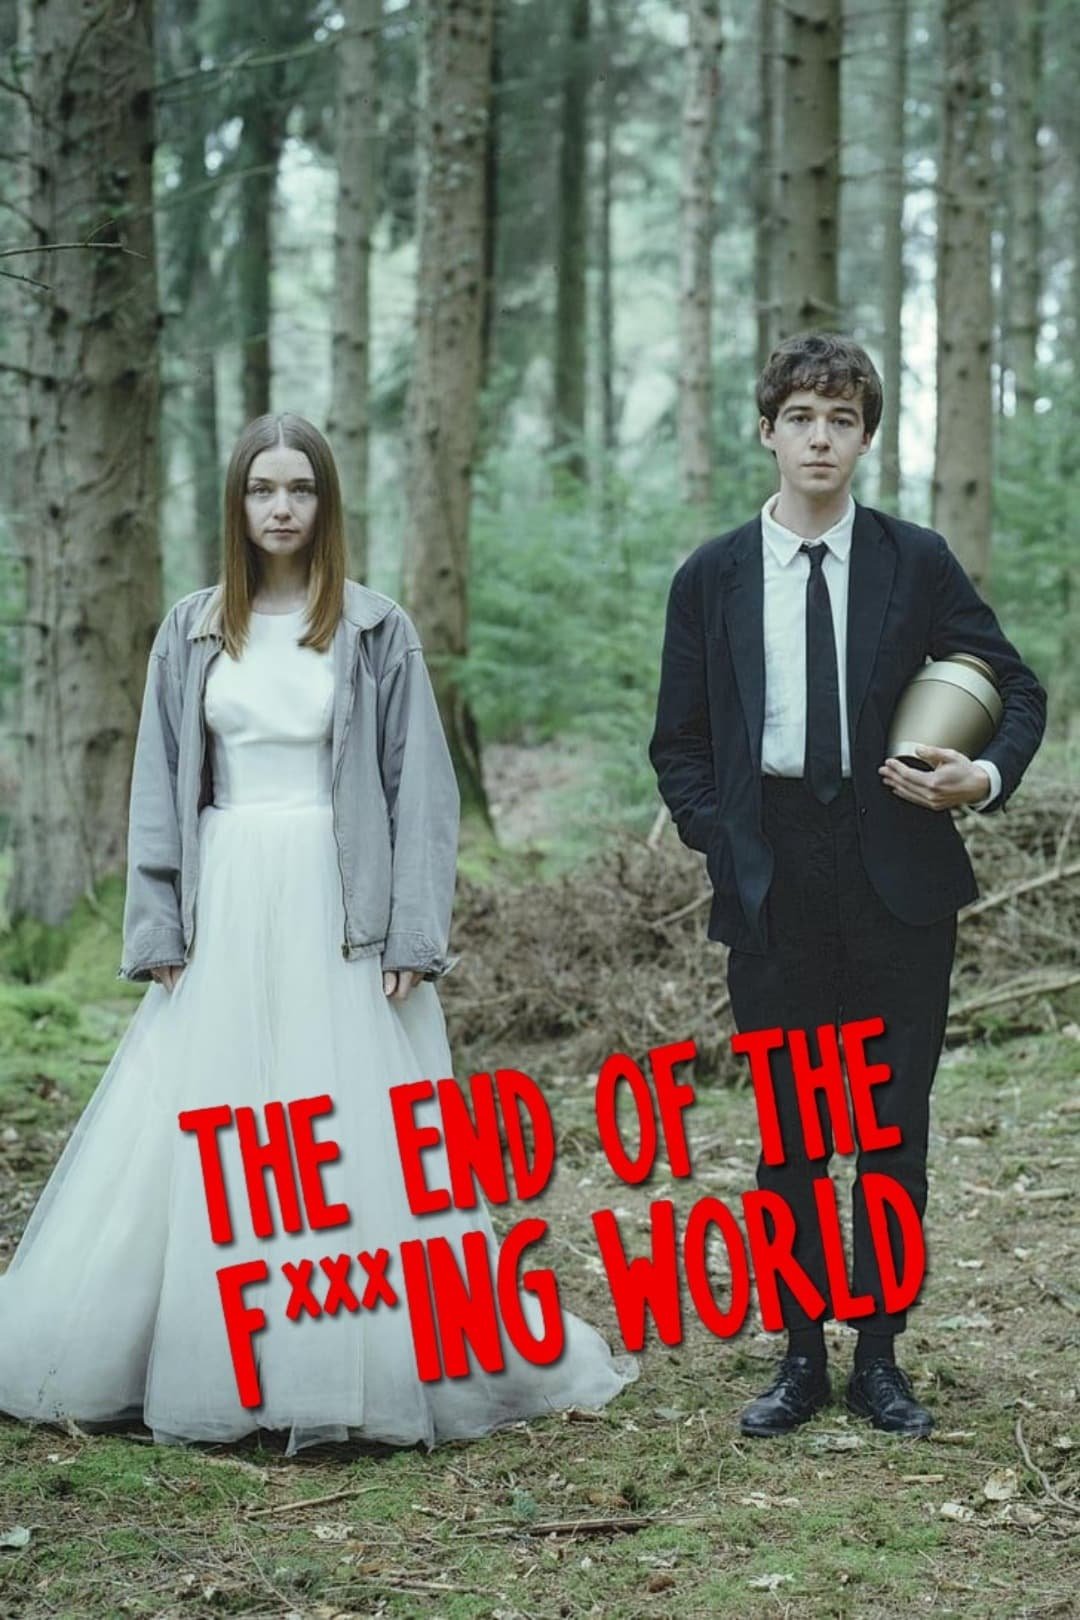 End Of The Fucking World.jpg